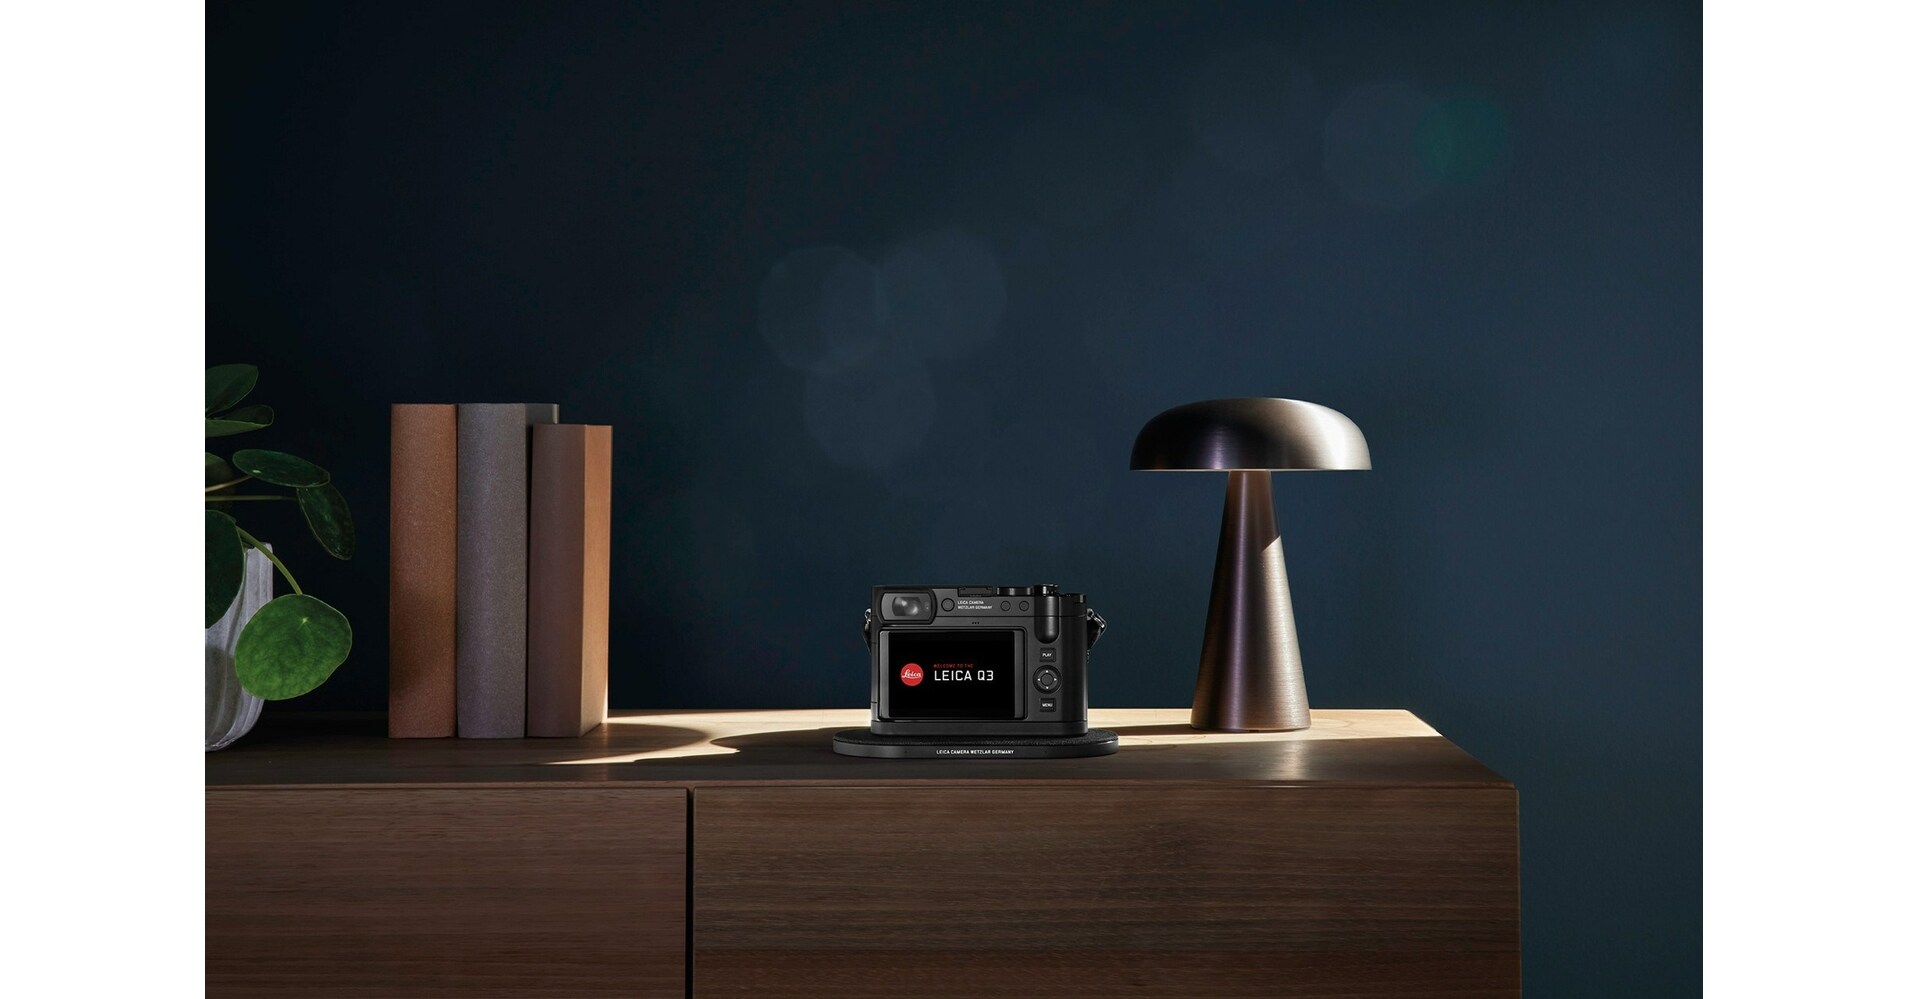 Leica Reimagines Photography with The Game-Changing 'Leica Q3